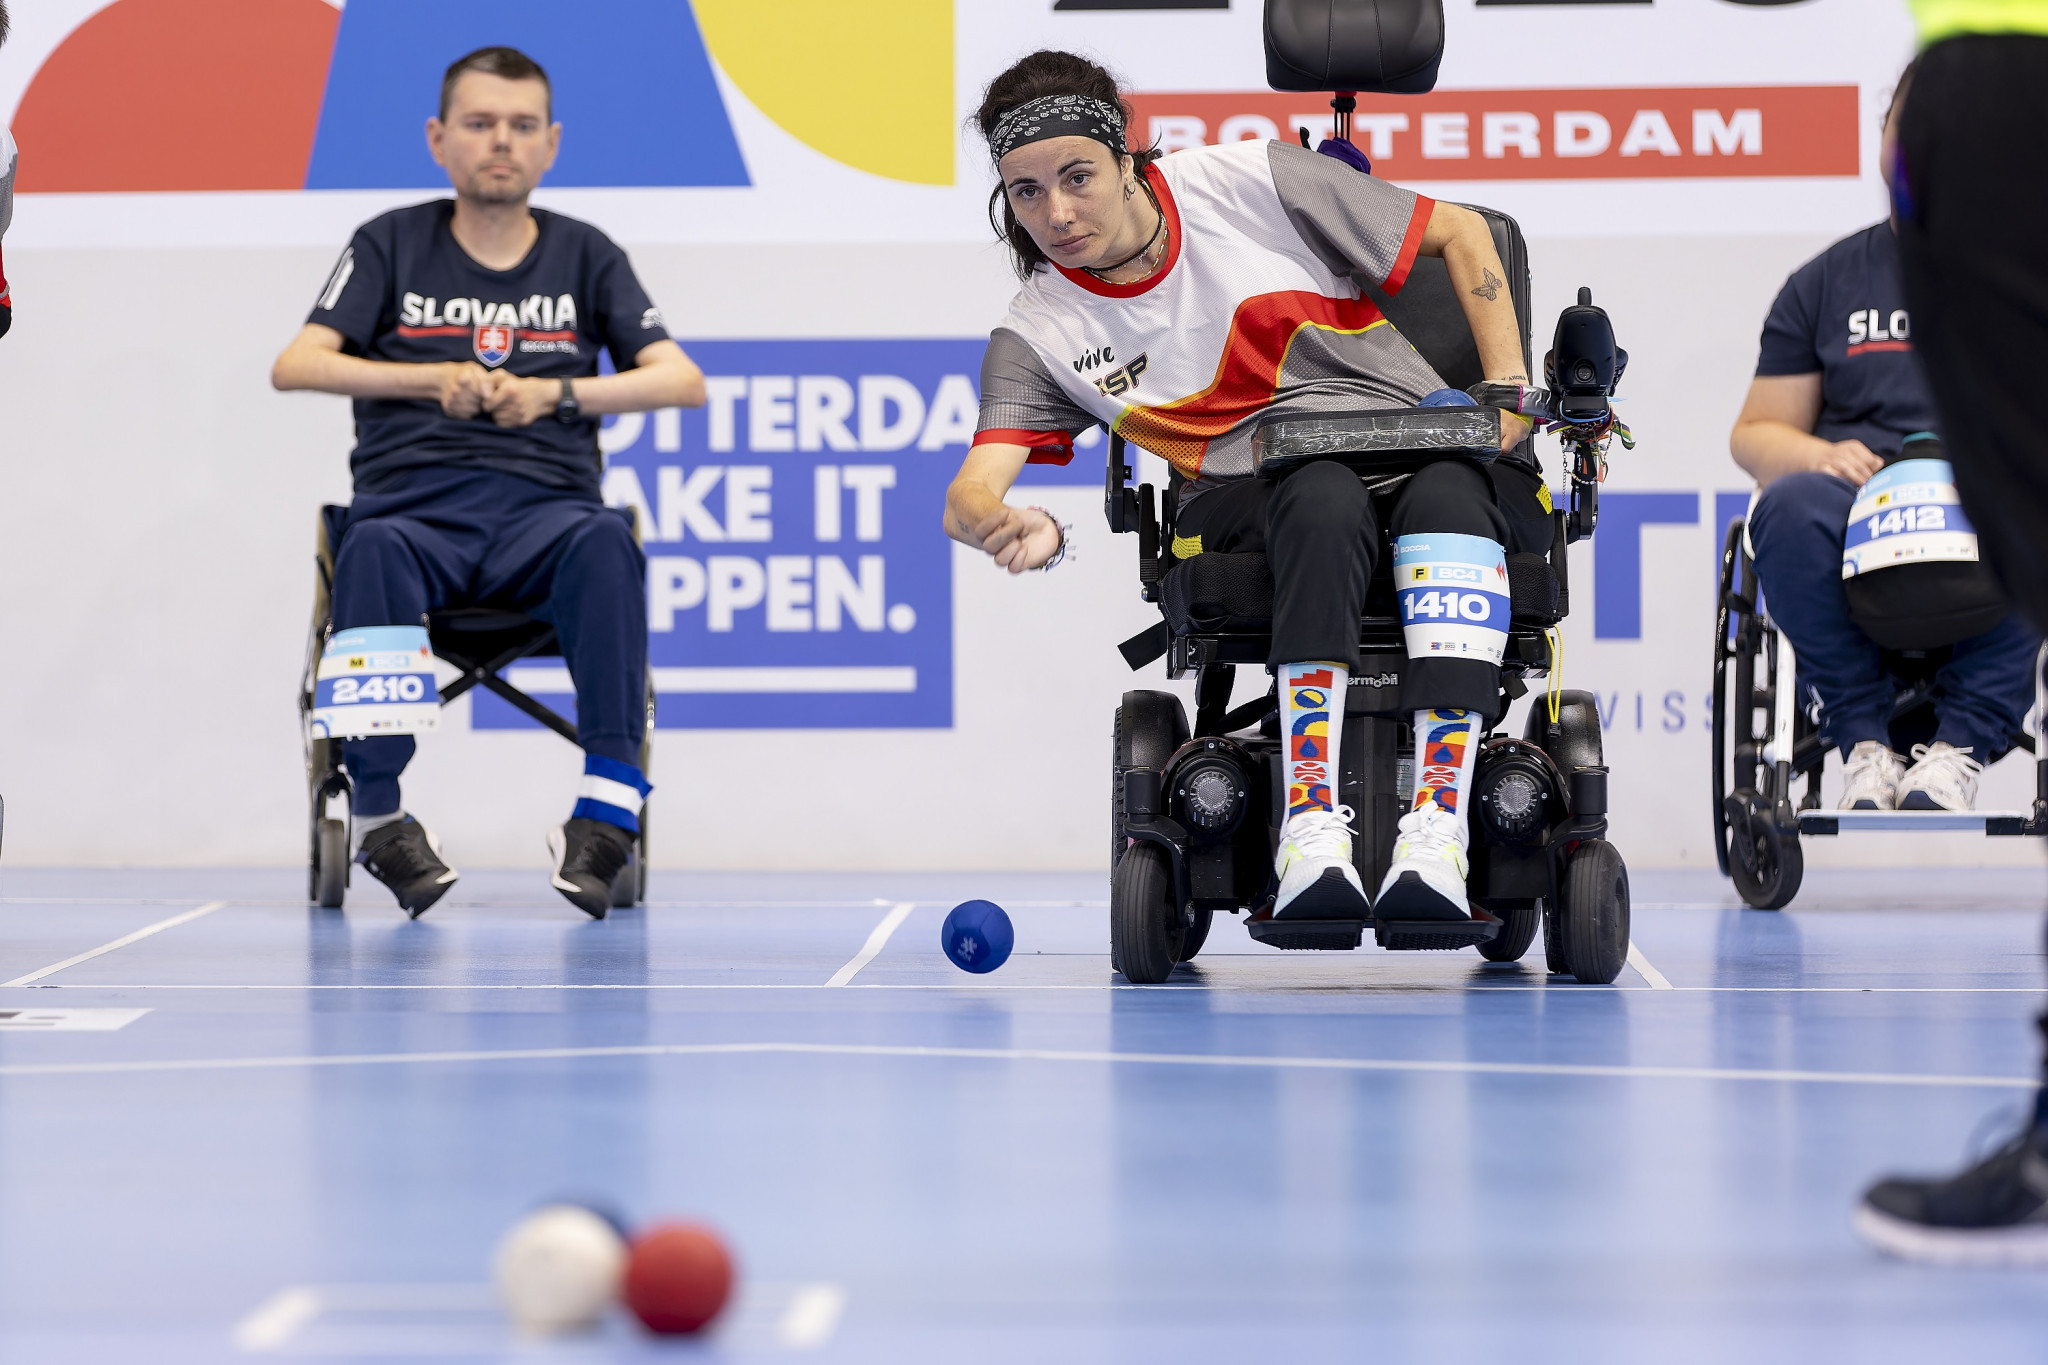 Several rounds of boccia matches were played as the competition reaches the final stages ©EPC